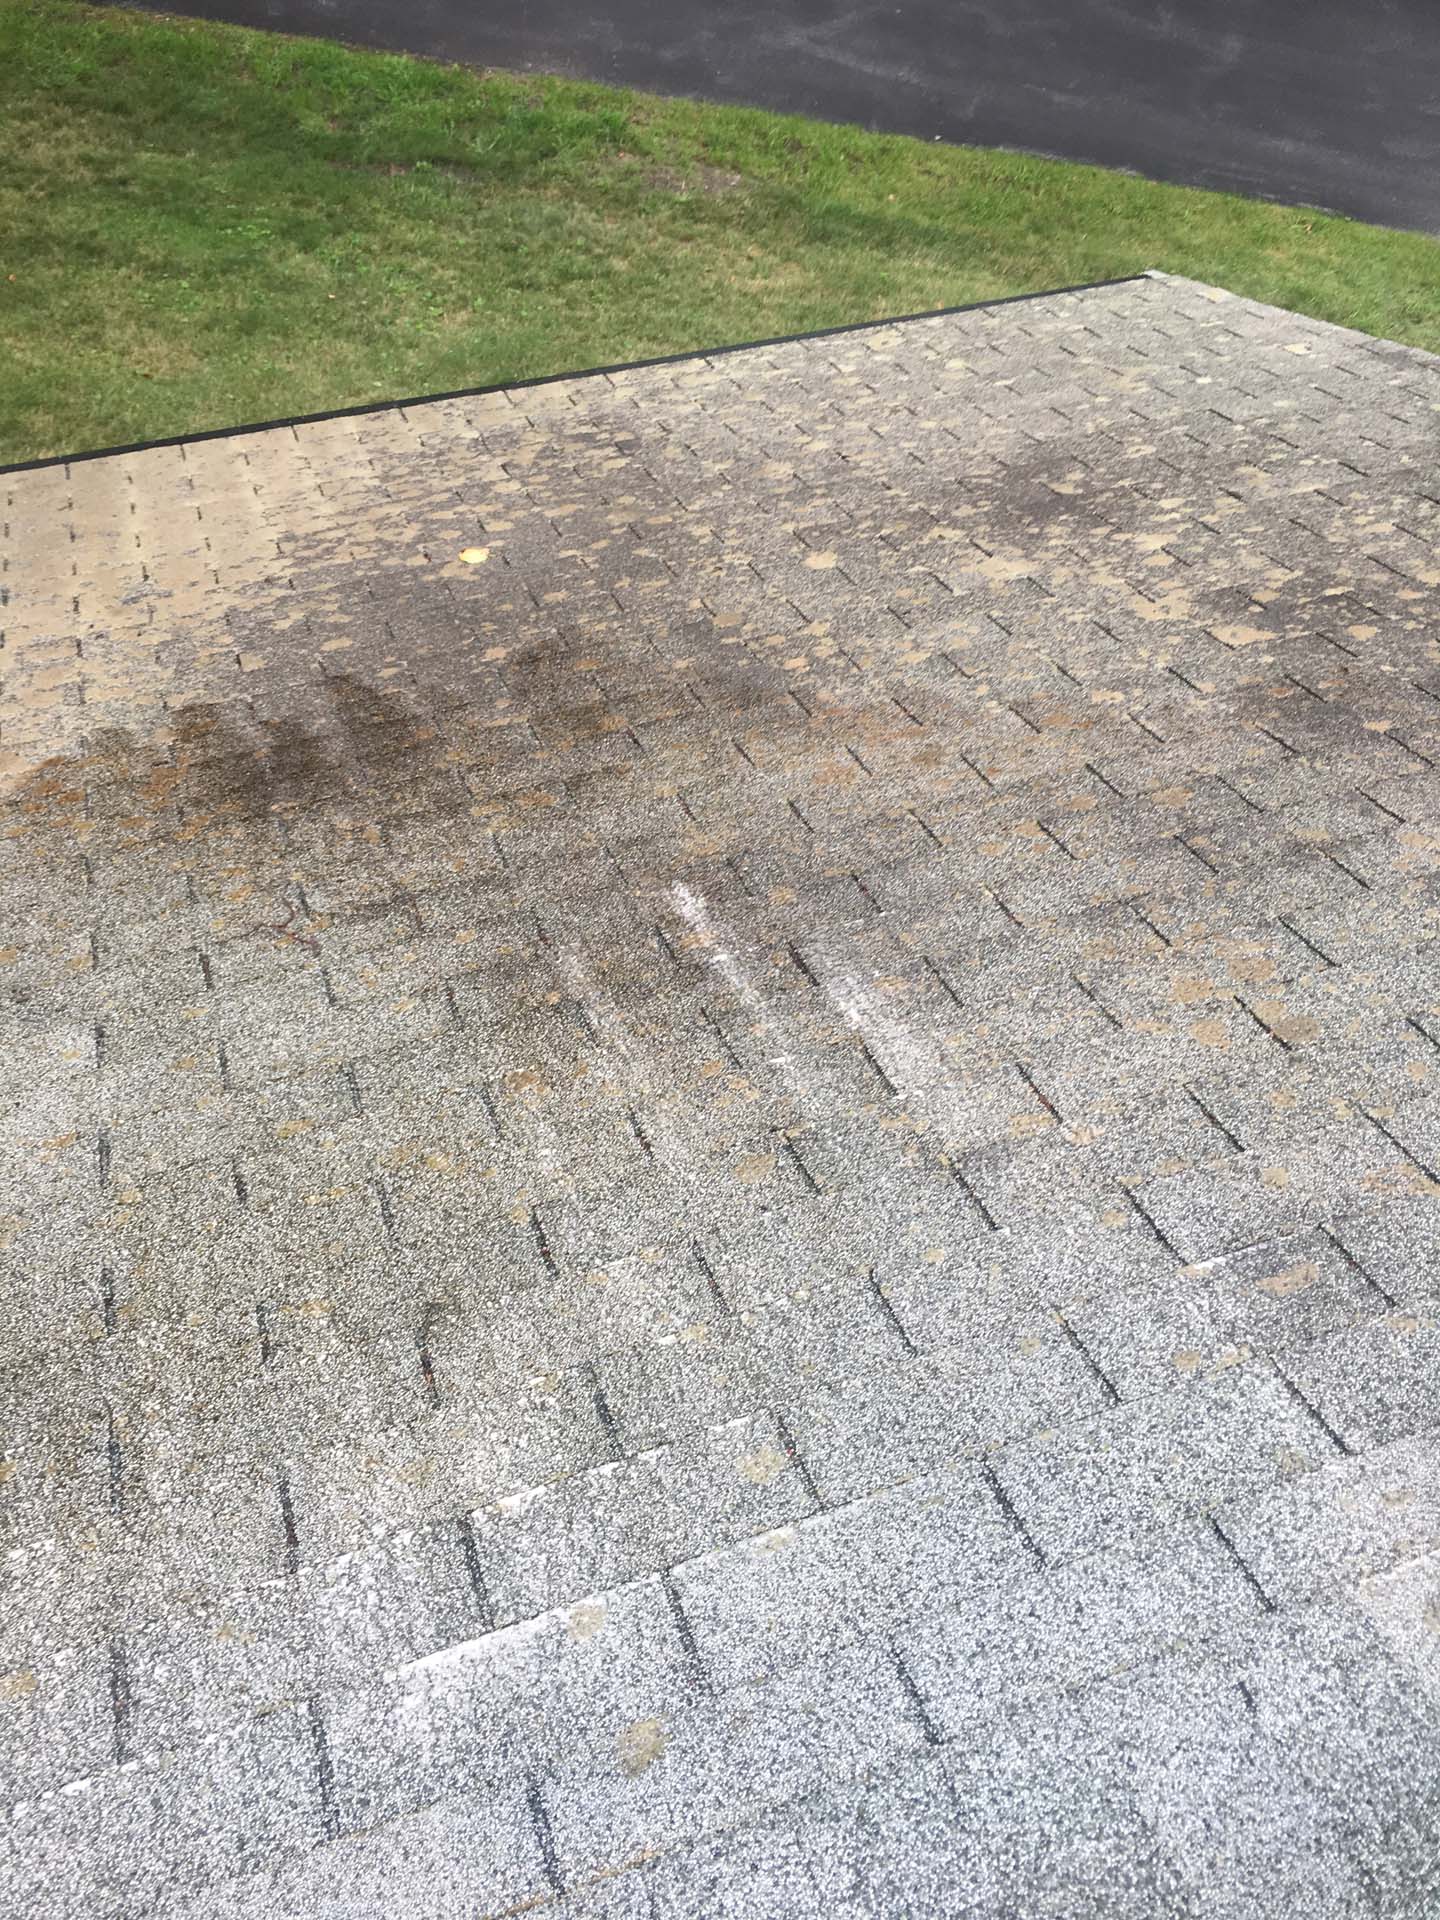 shingles before being cleaned